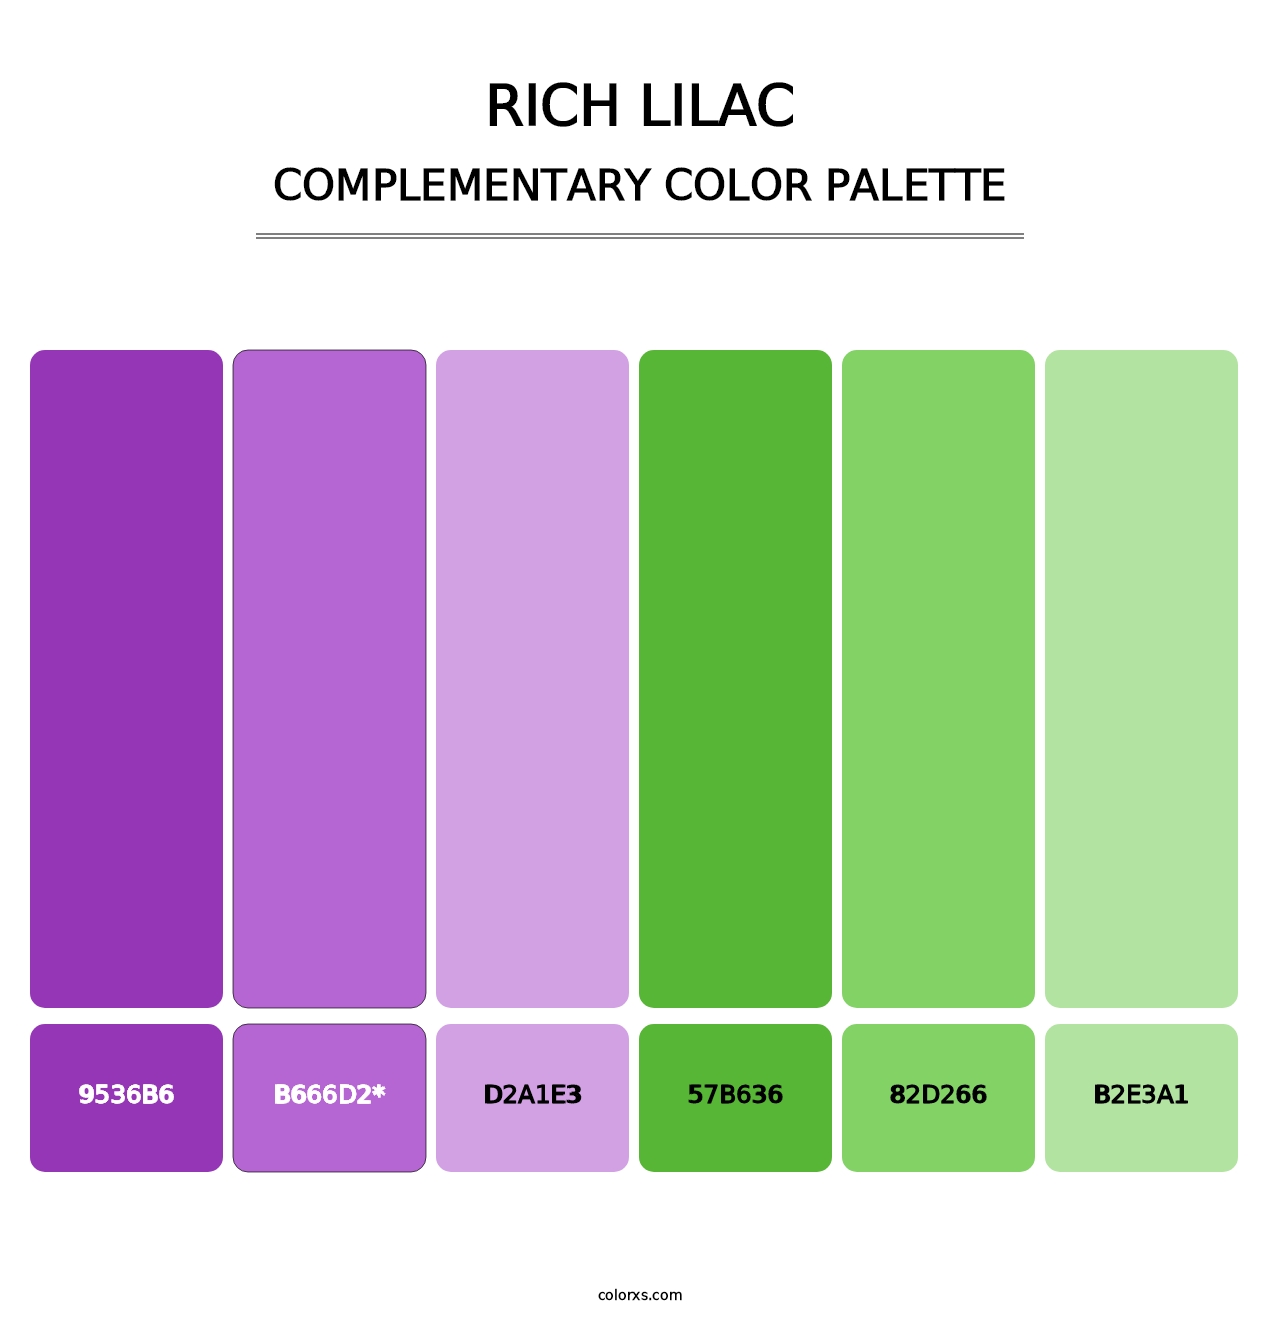 Rich Lilac - Complementary Color Palette